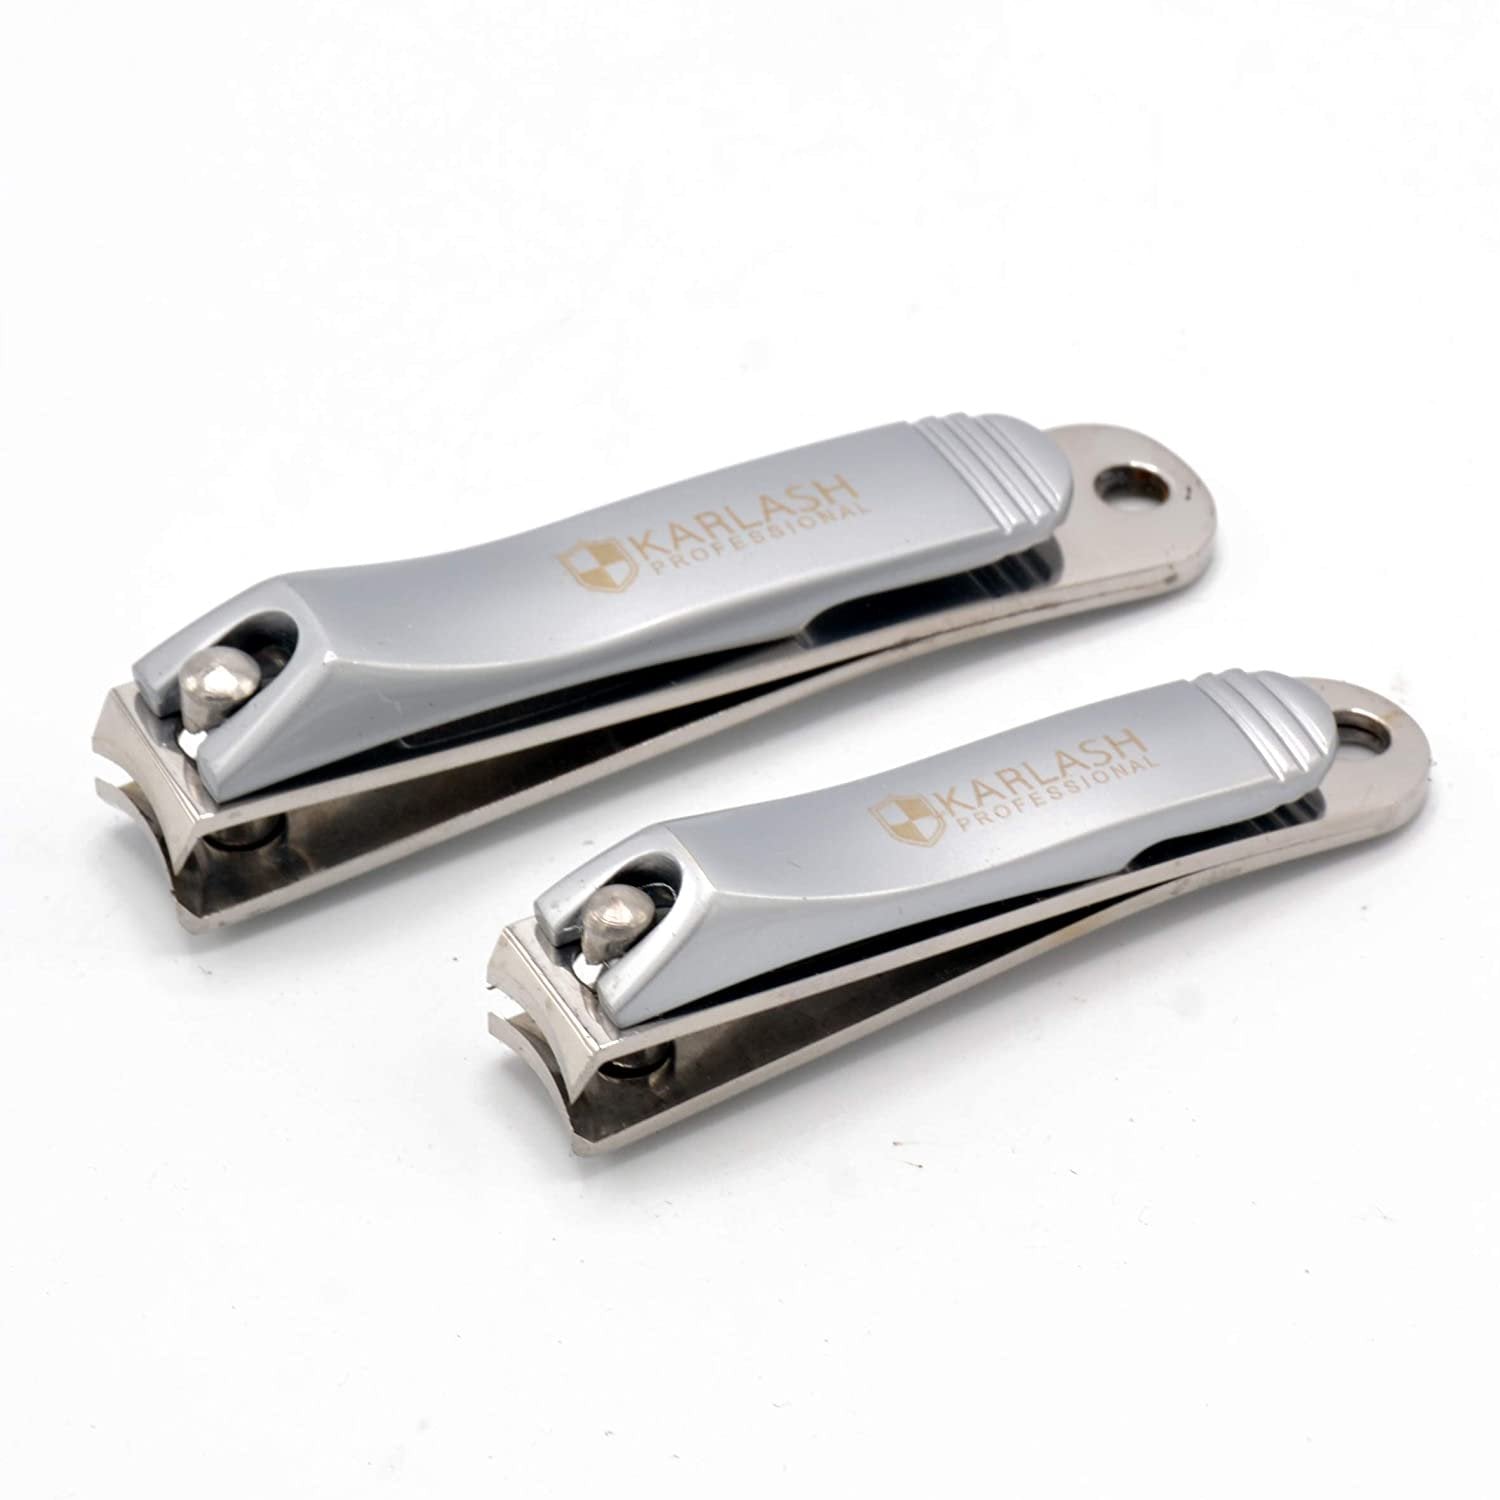 Japanese Stainless Steel Curved Blade Nail Clipper w/ File